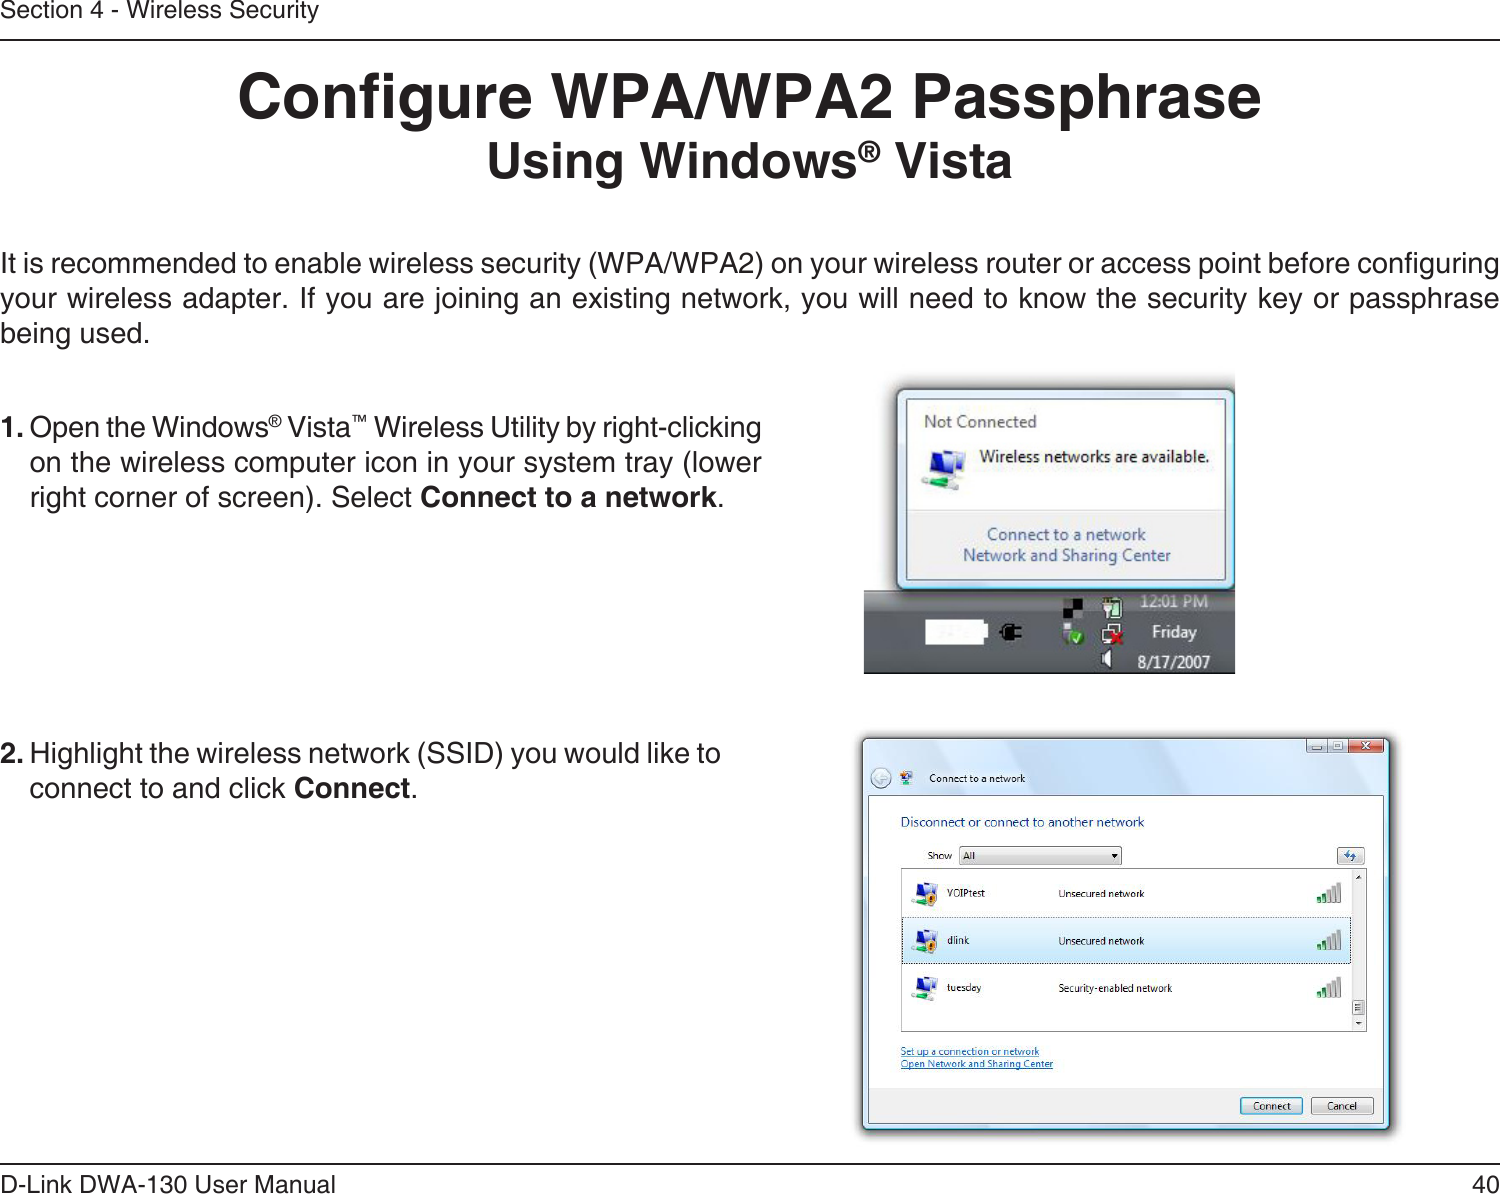 40D-Link DWA-130 User ManualSection 4 - Wireless SecurityCongure WPA/WPA2 PassphraseUsing Windows® VistaIt is recommended to enable wireless security (WPA/WPA2) on your wireless router or access point before conguring your wireless adapter. If you are joining an existing network, you will need to know the security key or passphrase being used.2. Highlight the wireless network (SSID) you would like to connect to and click Connect.1. Open the Windows® Vista™ Wireless Utility by right-clicking on the wireless computer icon in your system tray (lower right corner of screen). Select Connect to a network. 